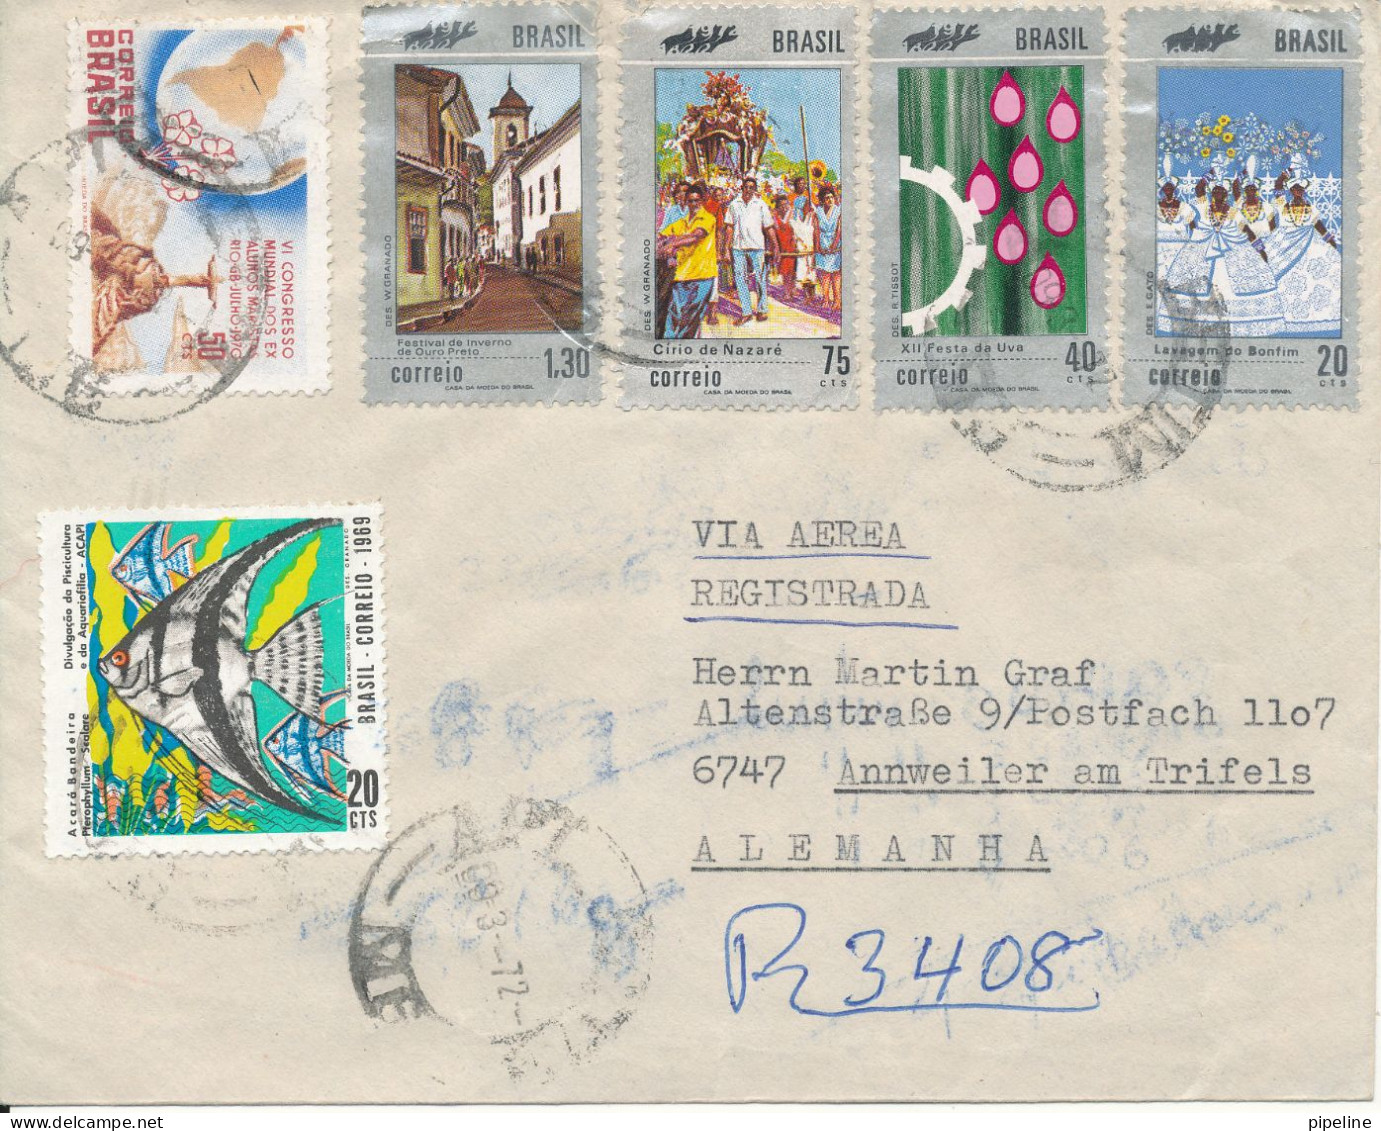 Brazil Registered Cover Sent To Denmark 1969 With More Topic Stamps (2 Stamps With A Damaged Corner) - Covers & Documents